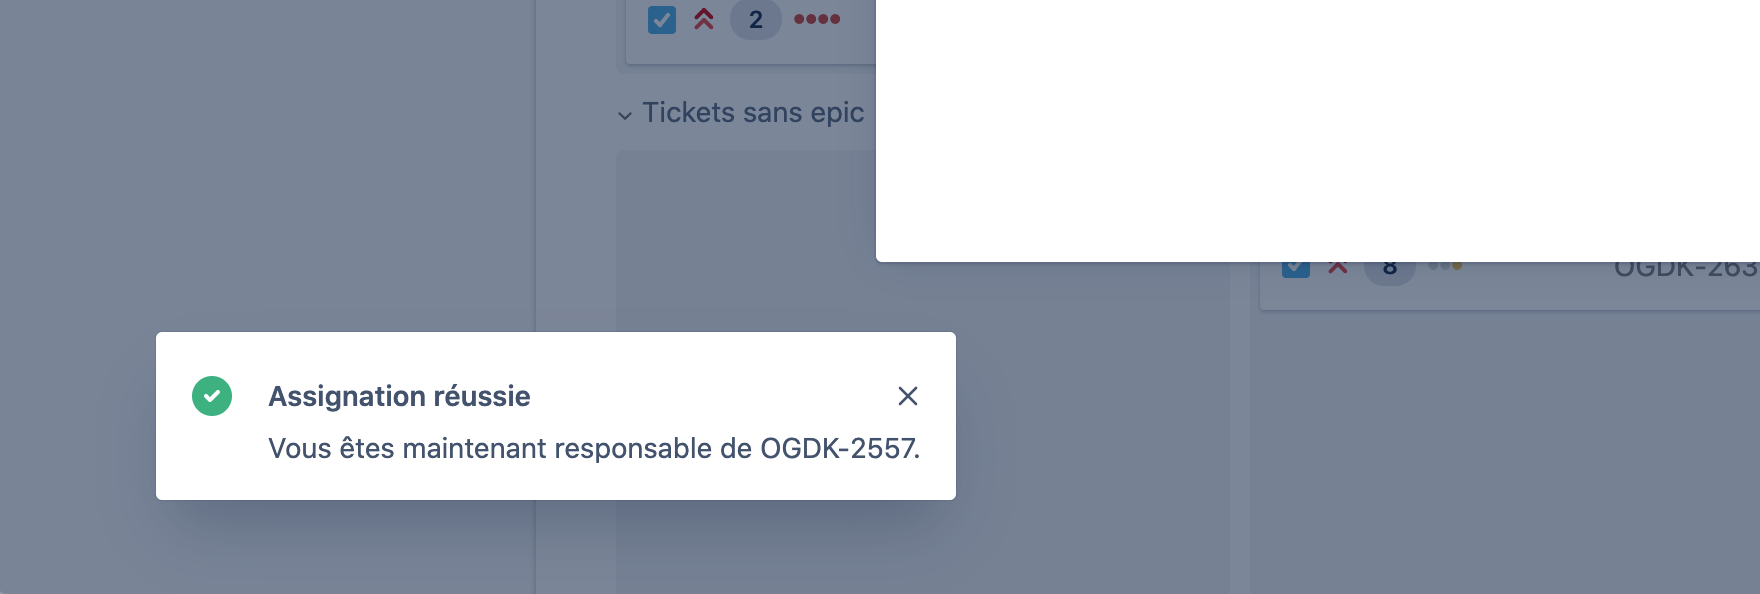 A notification Toast in Jira, appearing at the bottom left corner of the window